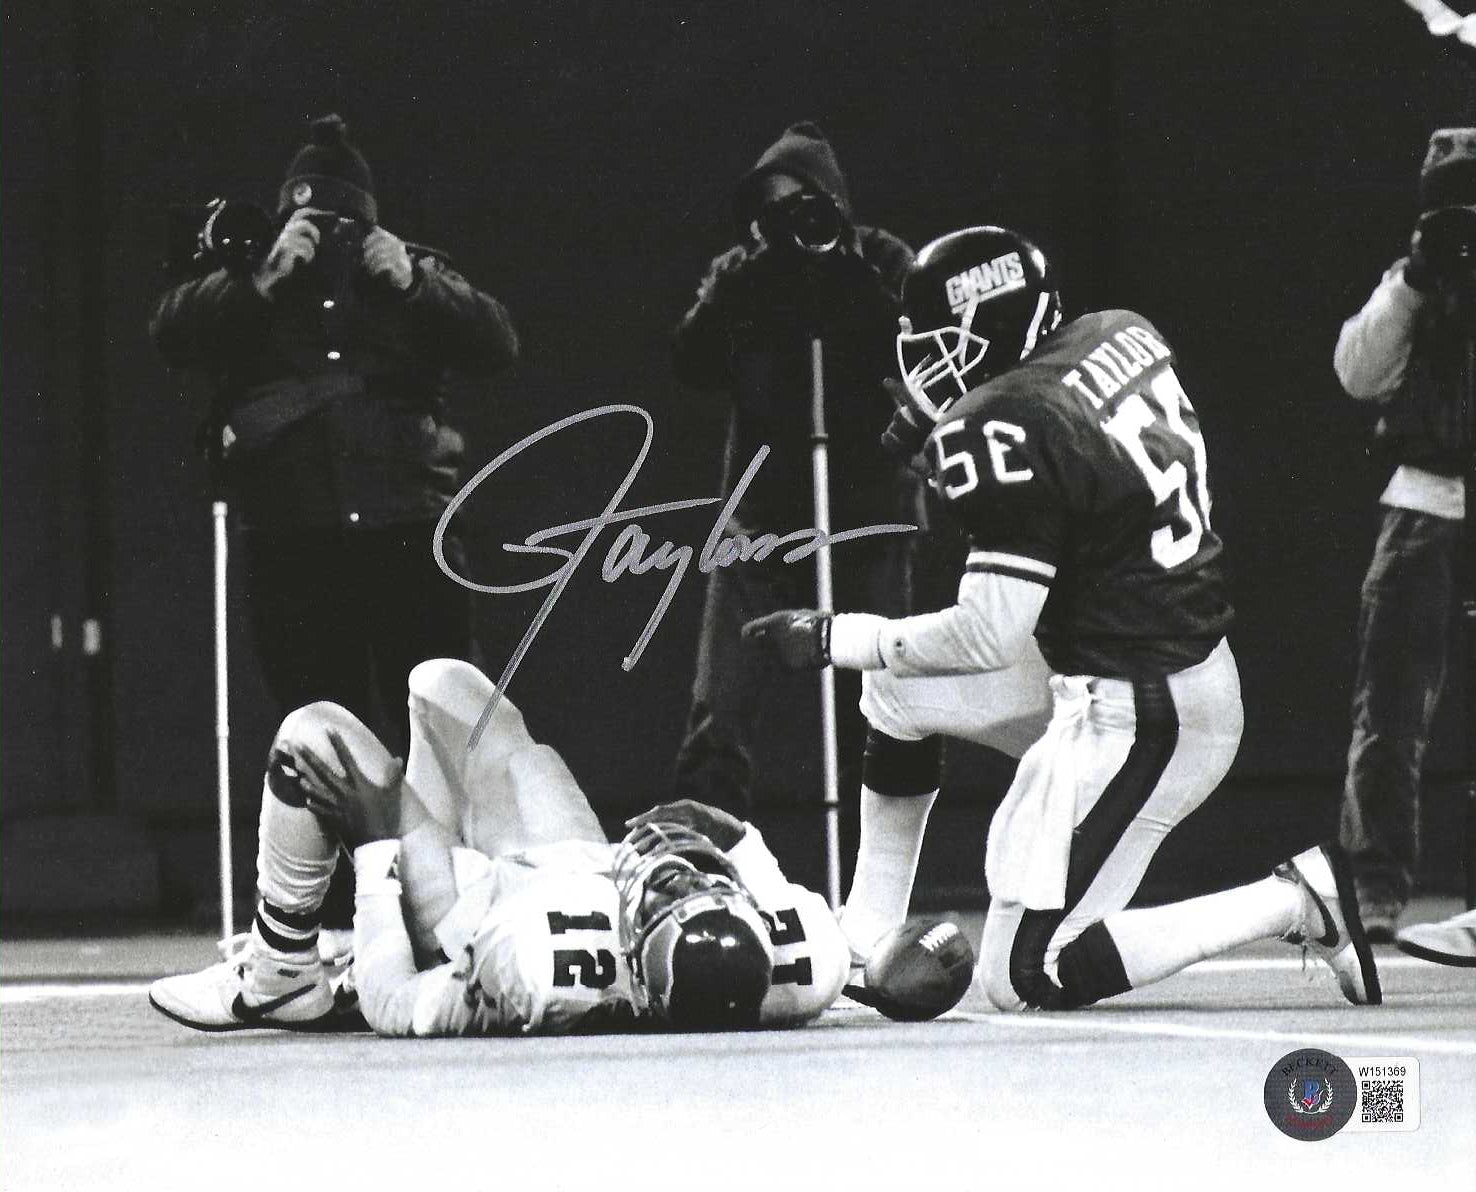 This photograph has been personally hand-signed by Lawrence Taylor.  It comes with an individually numbered, tamper proof certificate of authenticity from Becketts. This ensures authenticity, and can be reviewed online. This shows that the product purchased is authentic and eliminates any possibility of duplication or fraud.